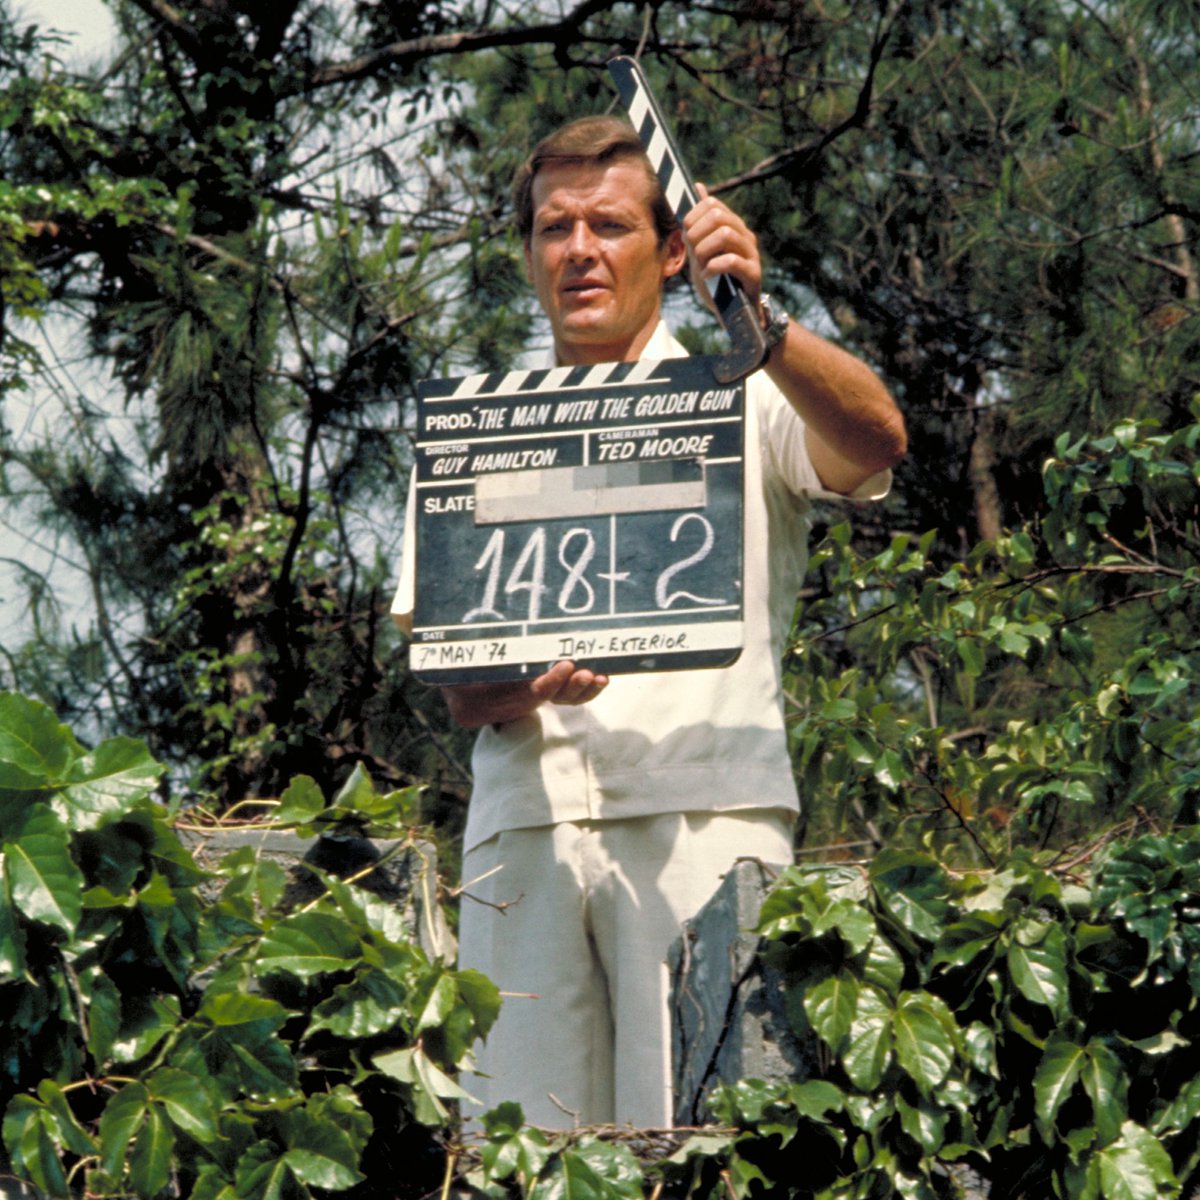 Zoom in on the clapperboard. Roger Moore climbing the walls of Hai Fat’s mountainside home was filmed on this day in 1974. #TheManWithTheGoldenGun